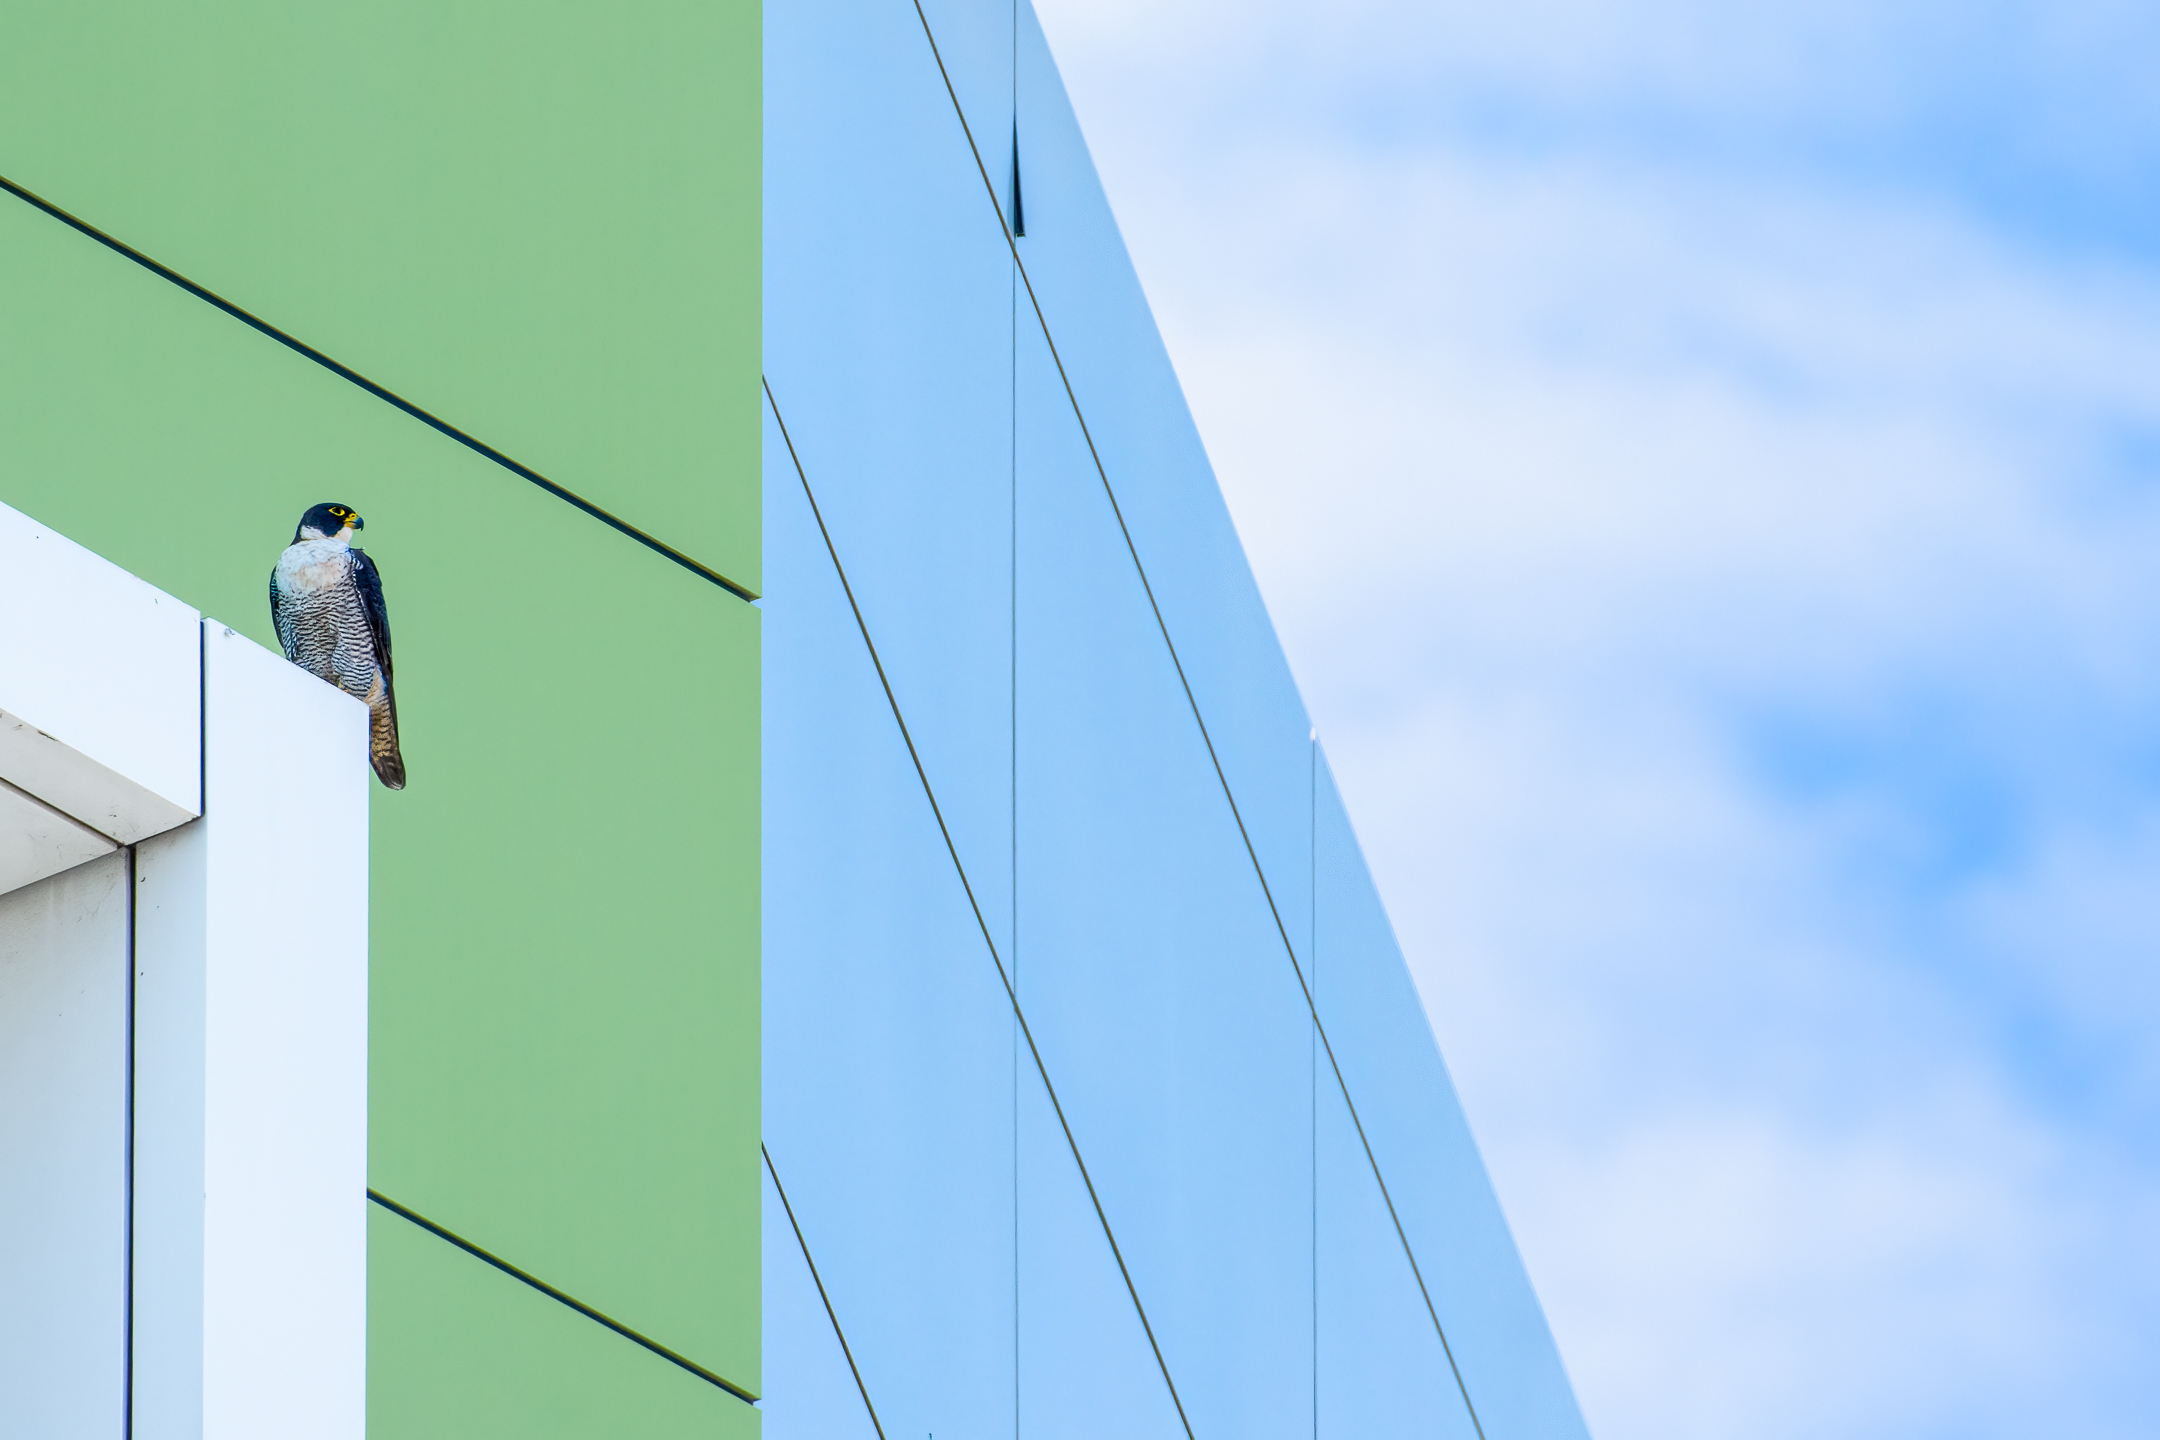 To the left of the frame, a Peregrine Falcon is perched on the outside of a white, green and blue building, surveilling its surroundings.